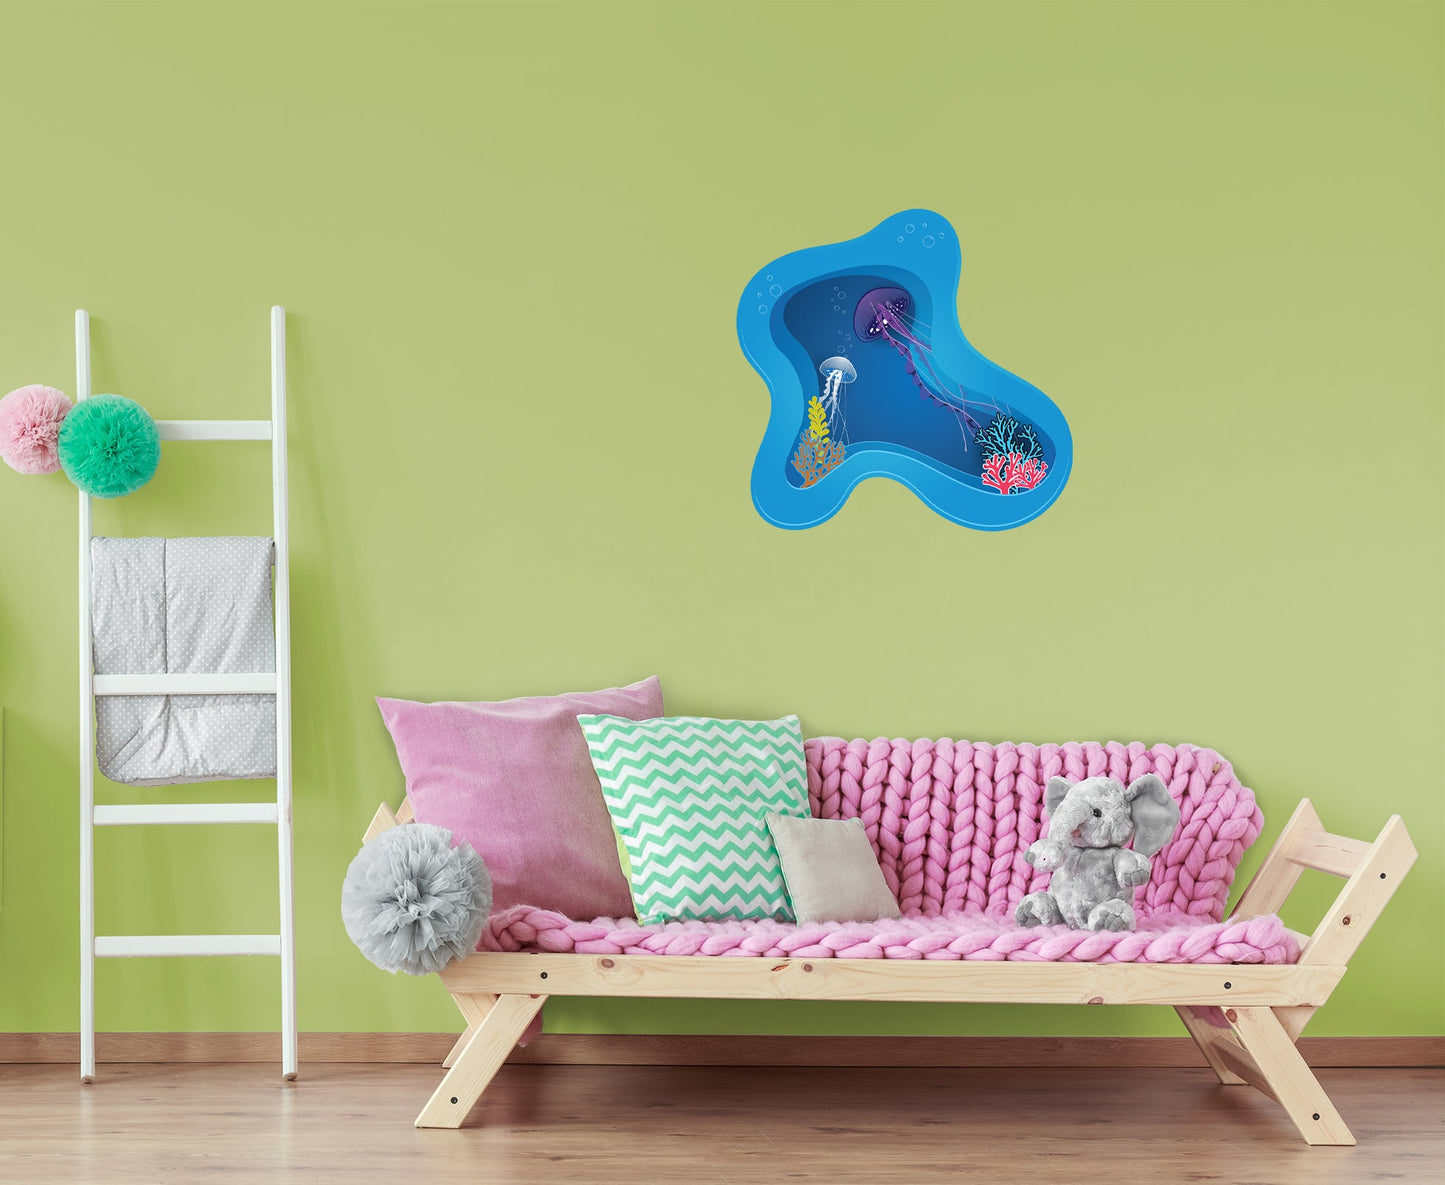 Nursery:  Jellyfish Icon        -   Removable Wall   Adhesive Decal